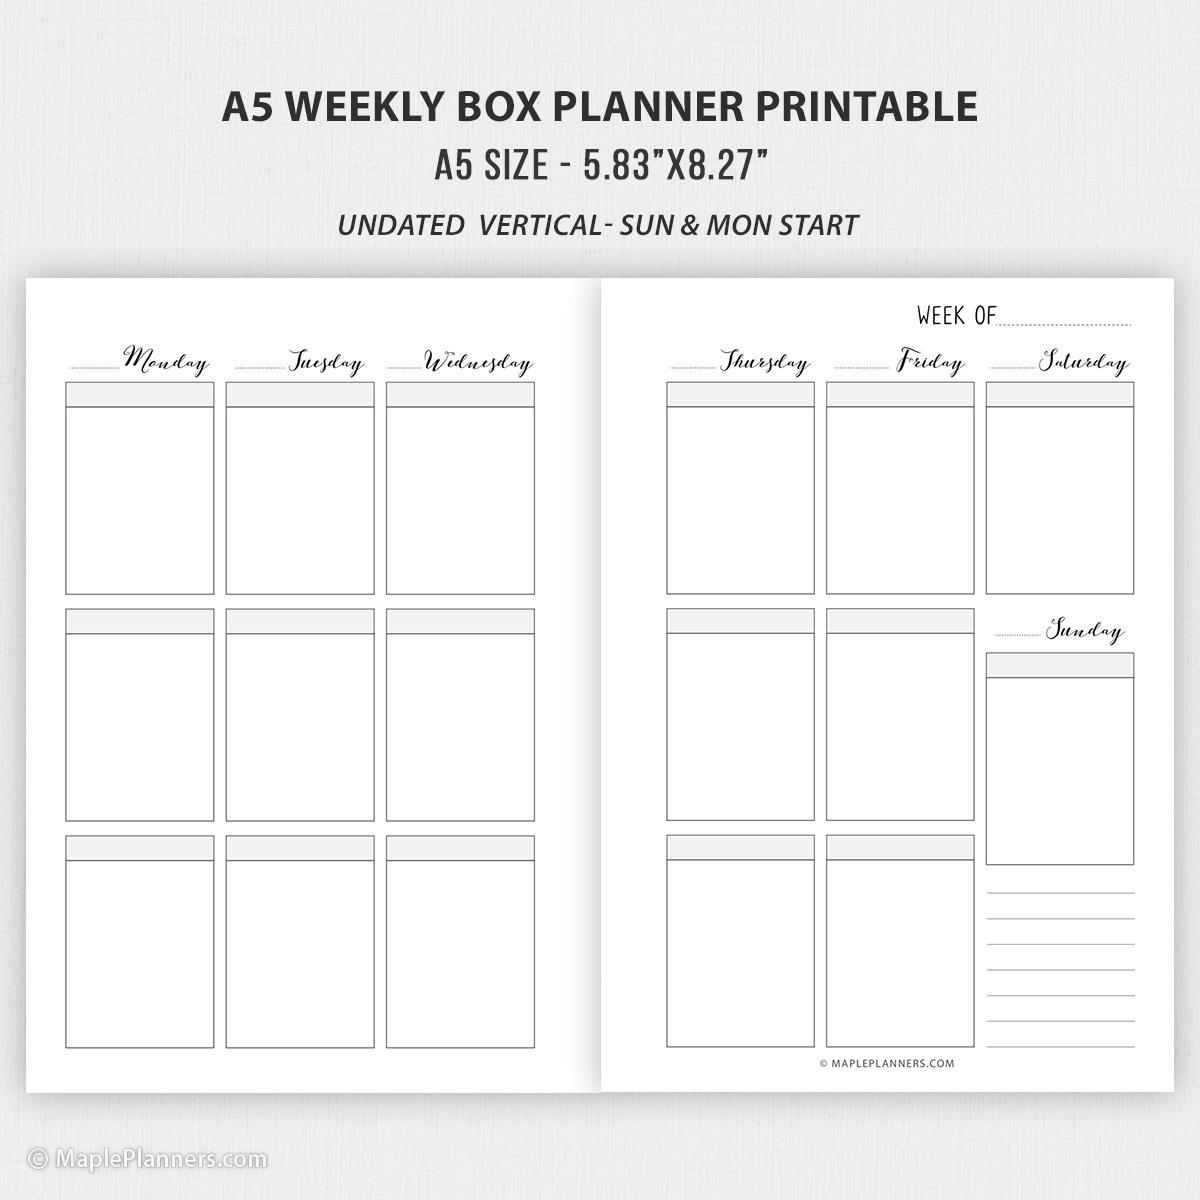 Calendars & Planners Paper A5 Printable Planner A5 Horizontal Weekly